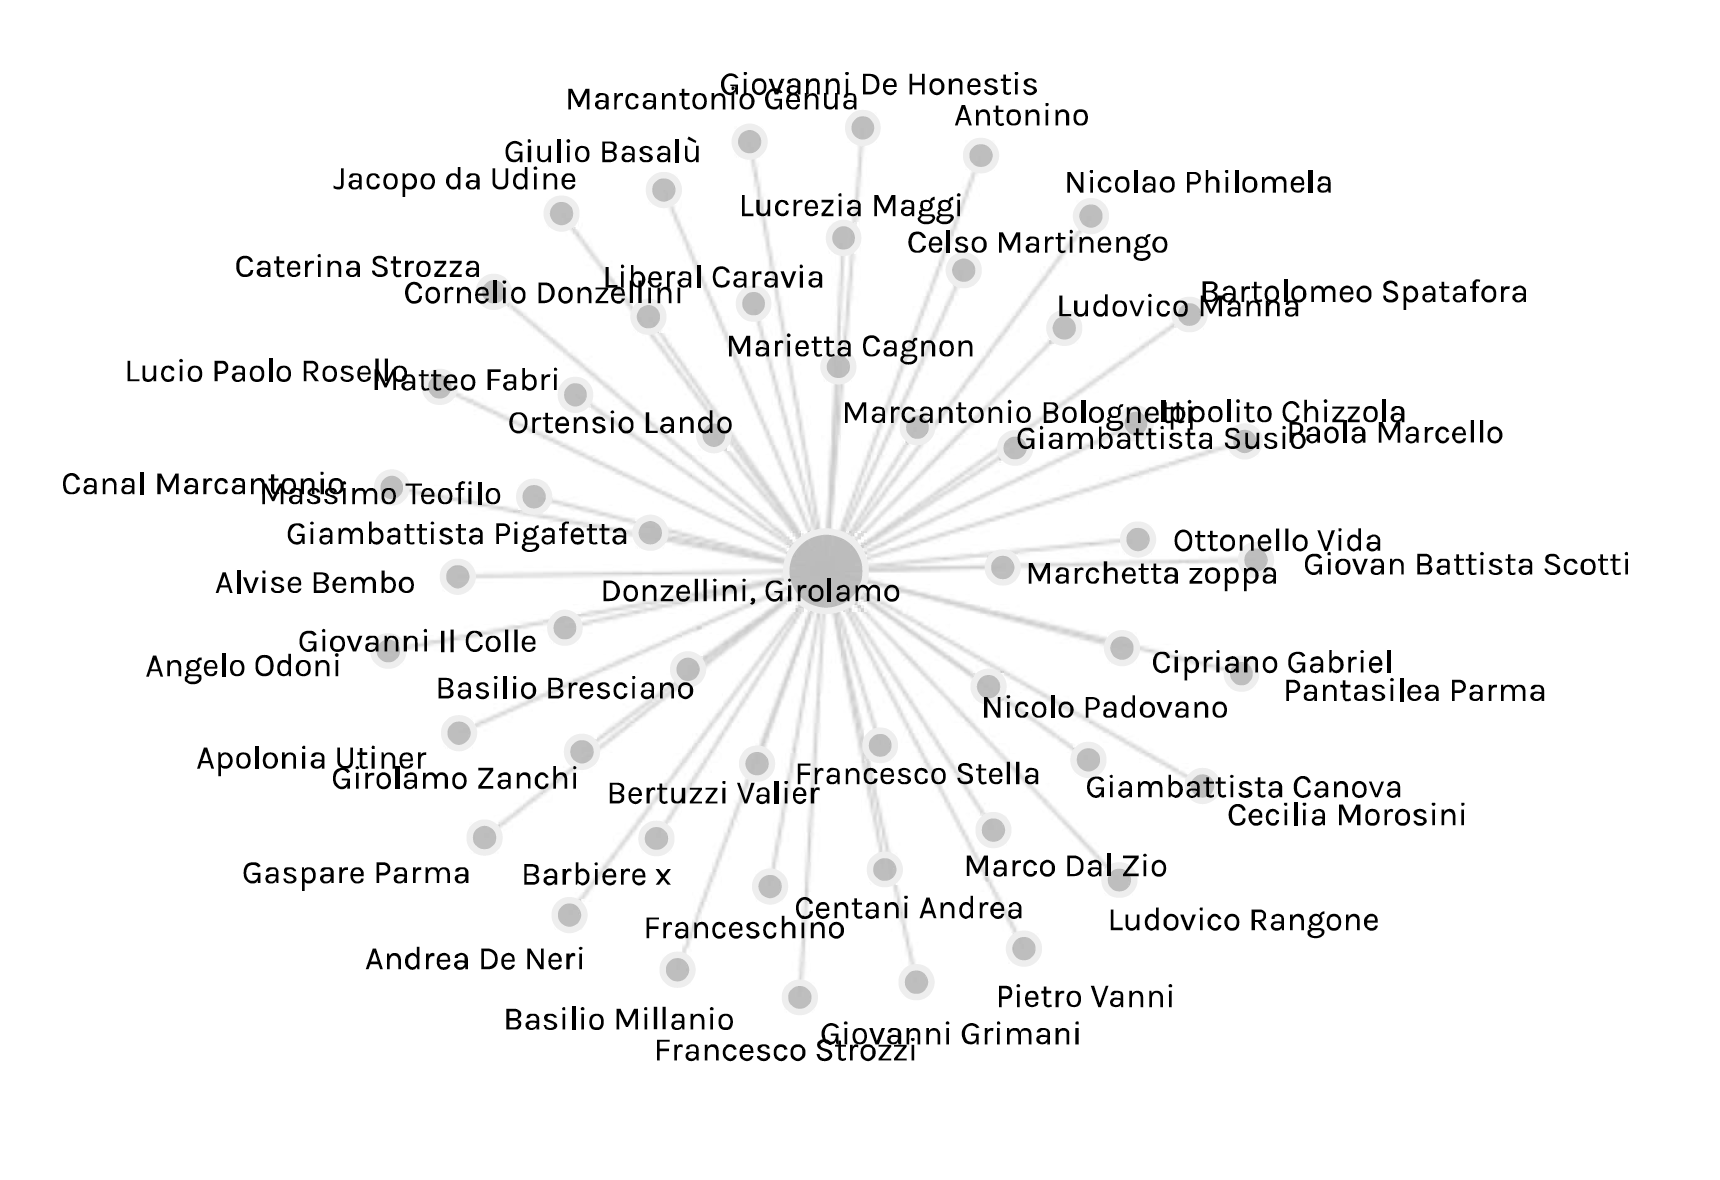 Venetial Heretical Network in 1540s to early 1550s